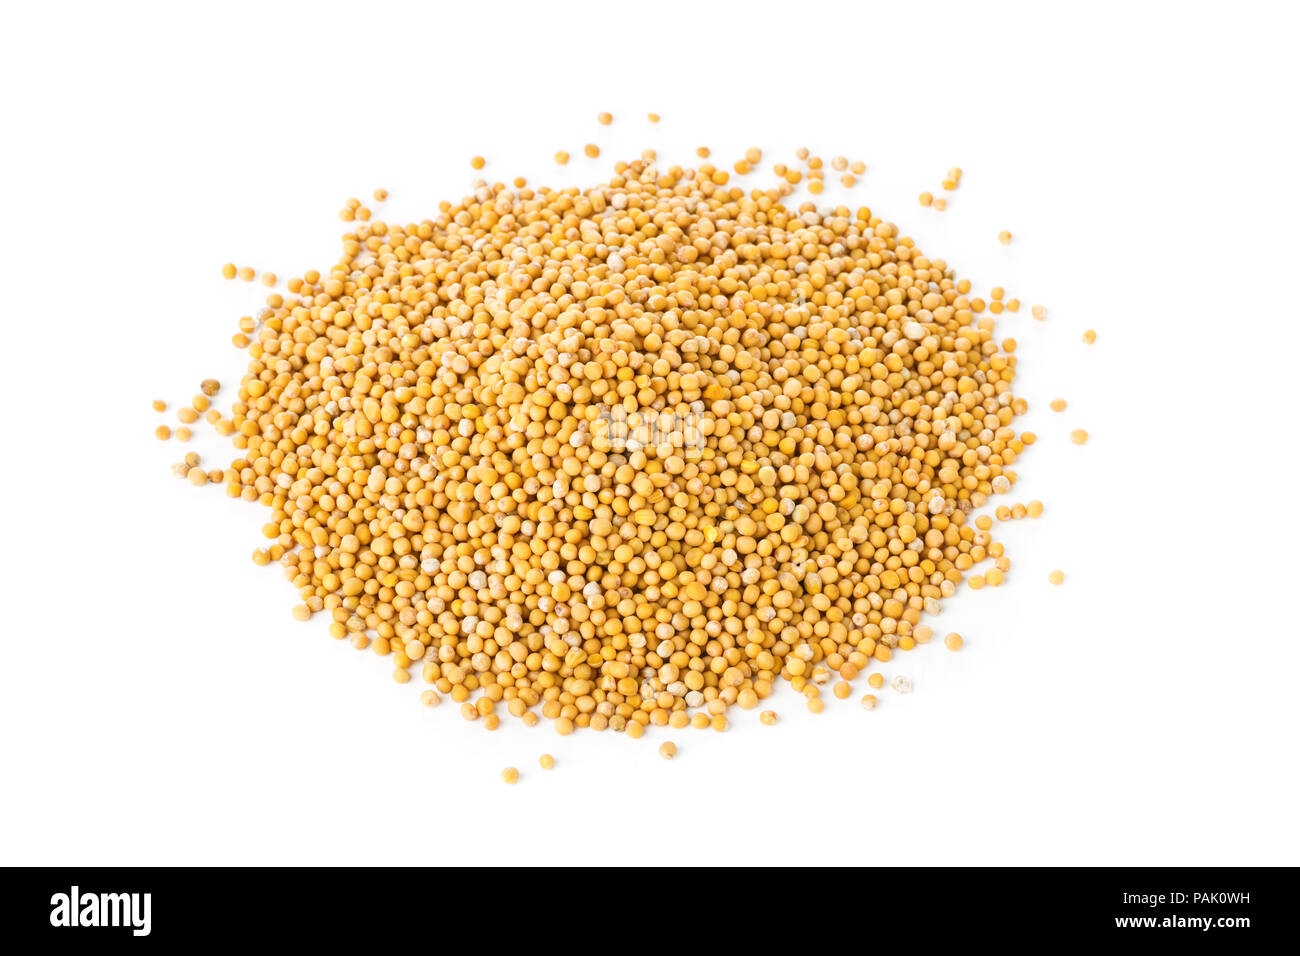 Heap of raw, unprocessed mustard seed kernels on white background Stock Photo